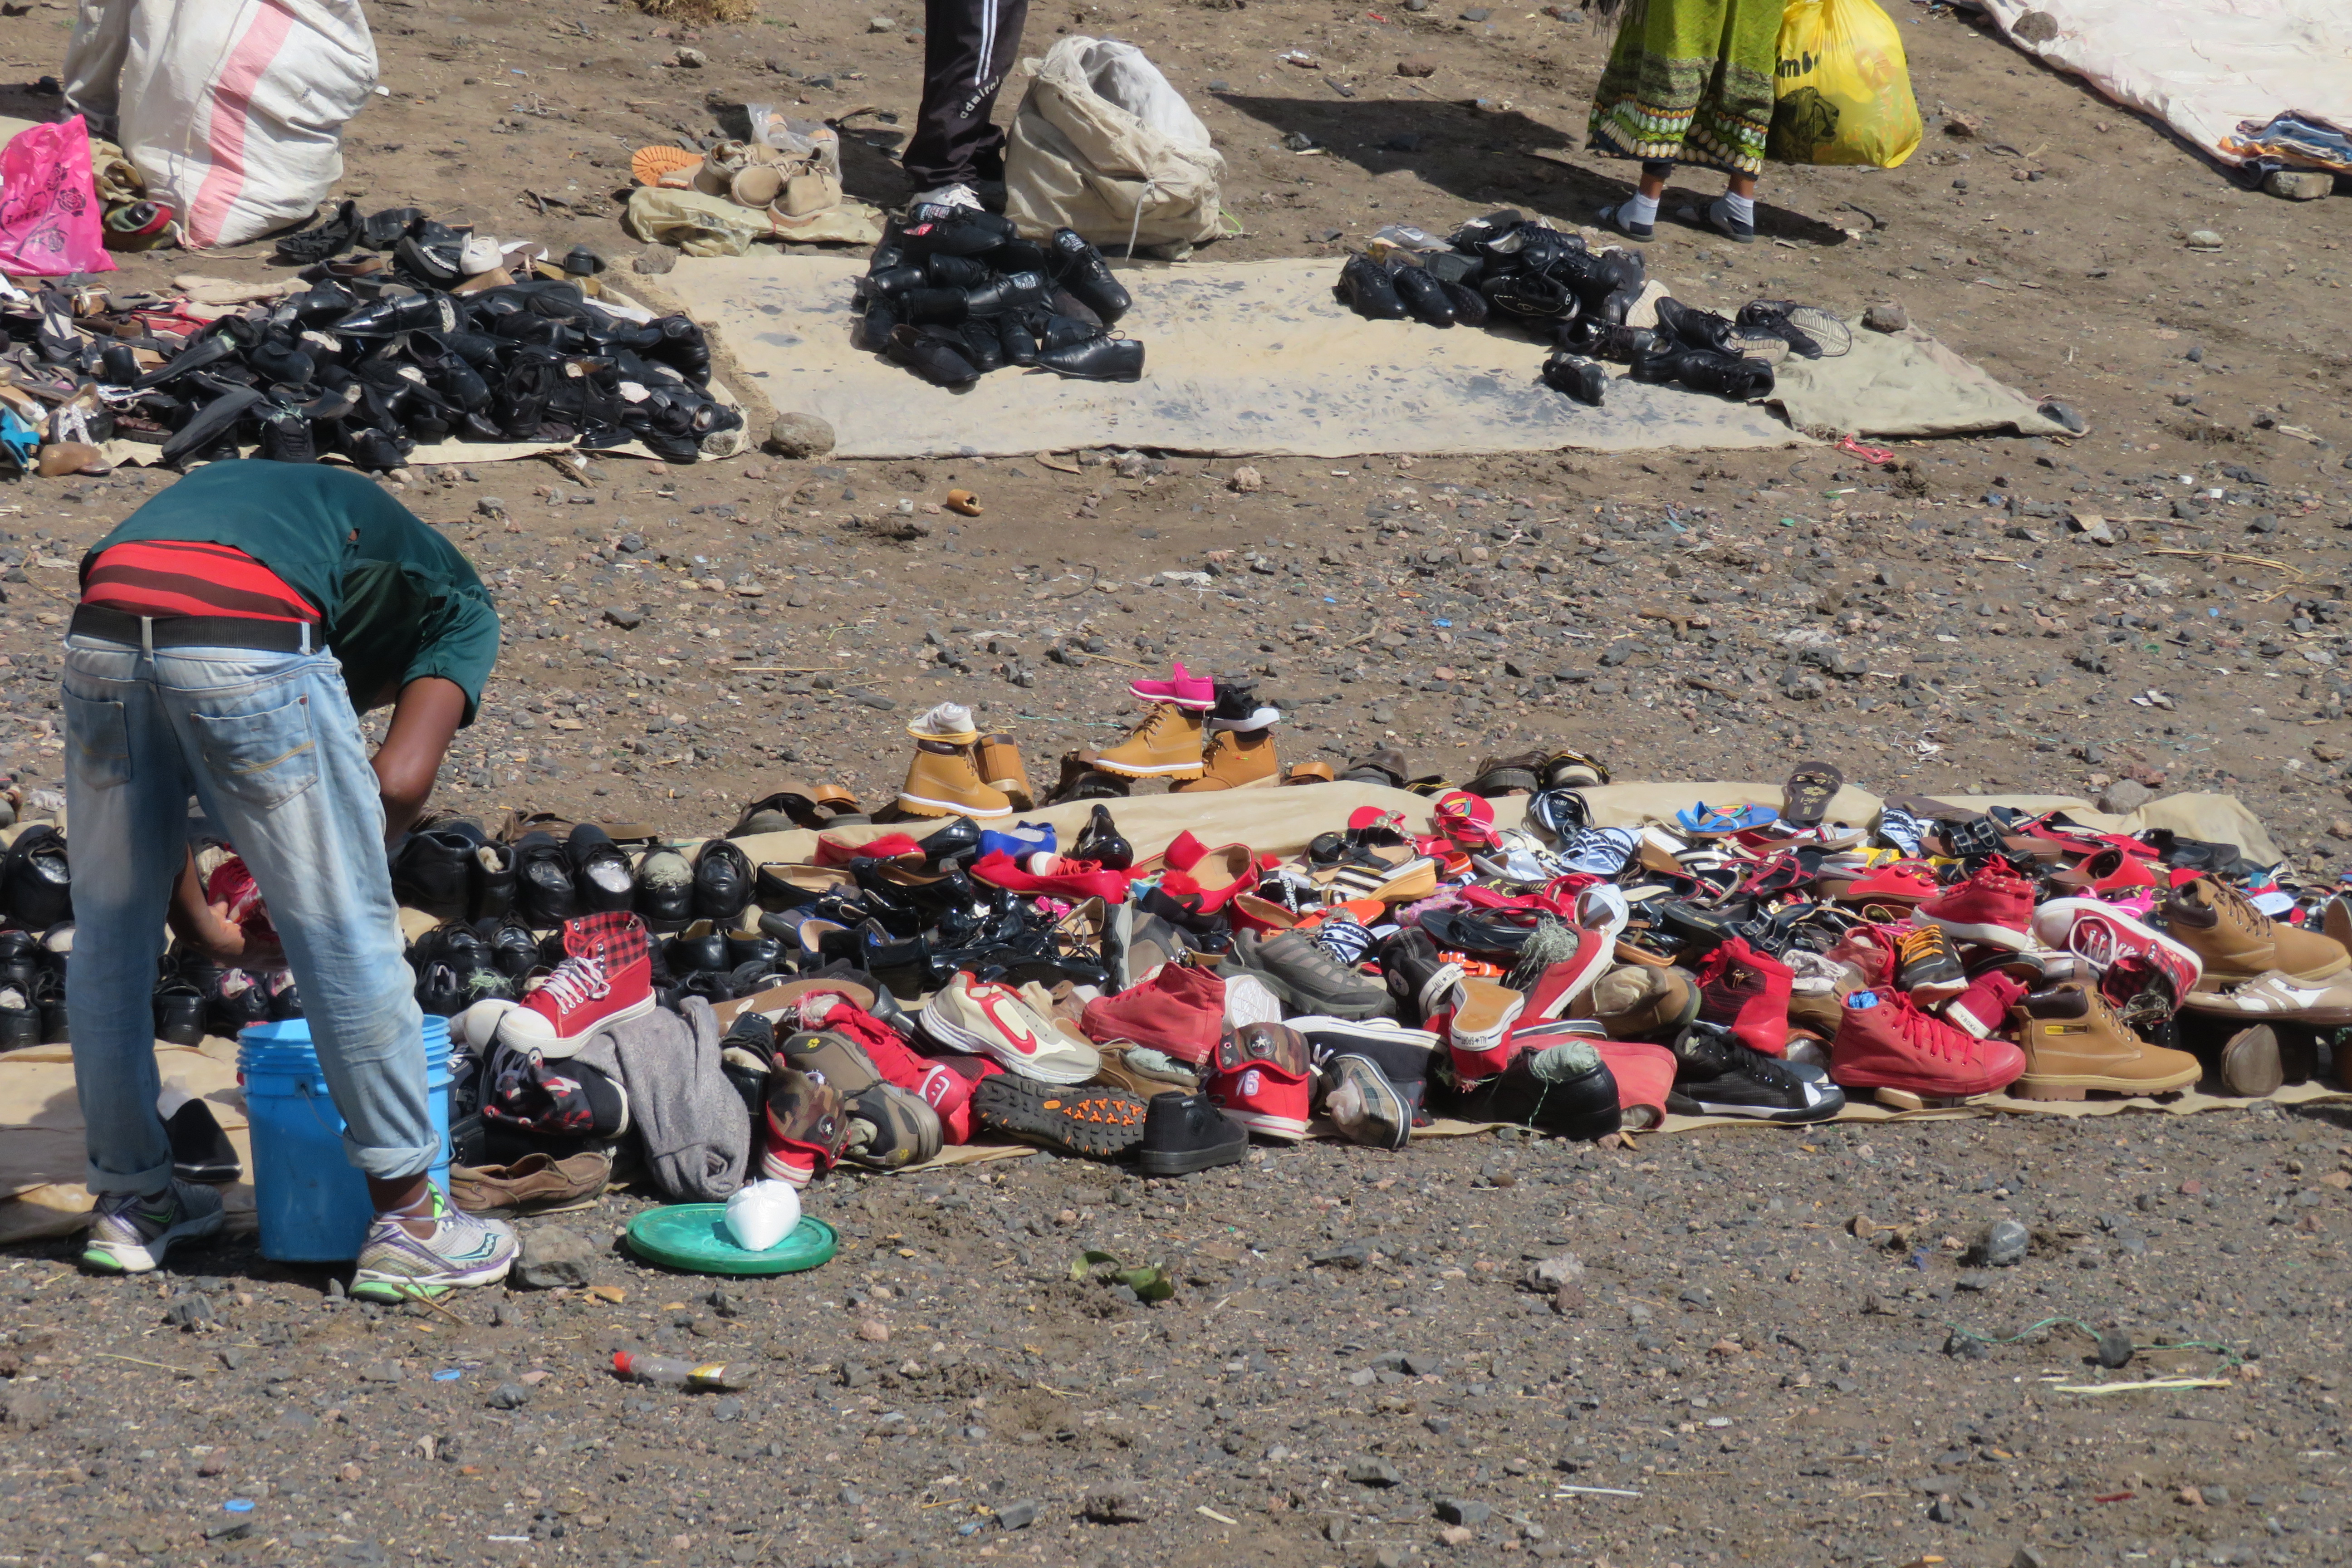 Shoes for sale at a Maasai market